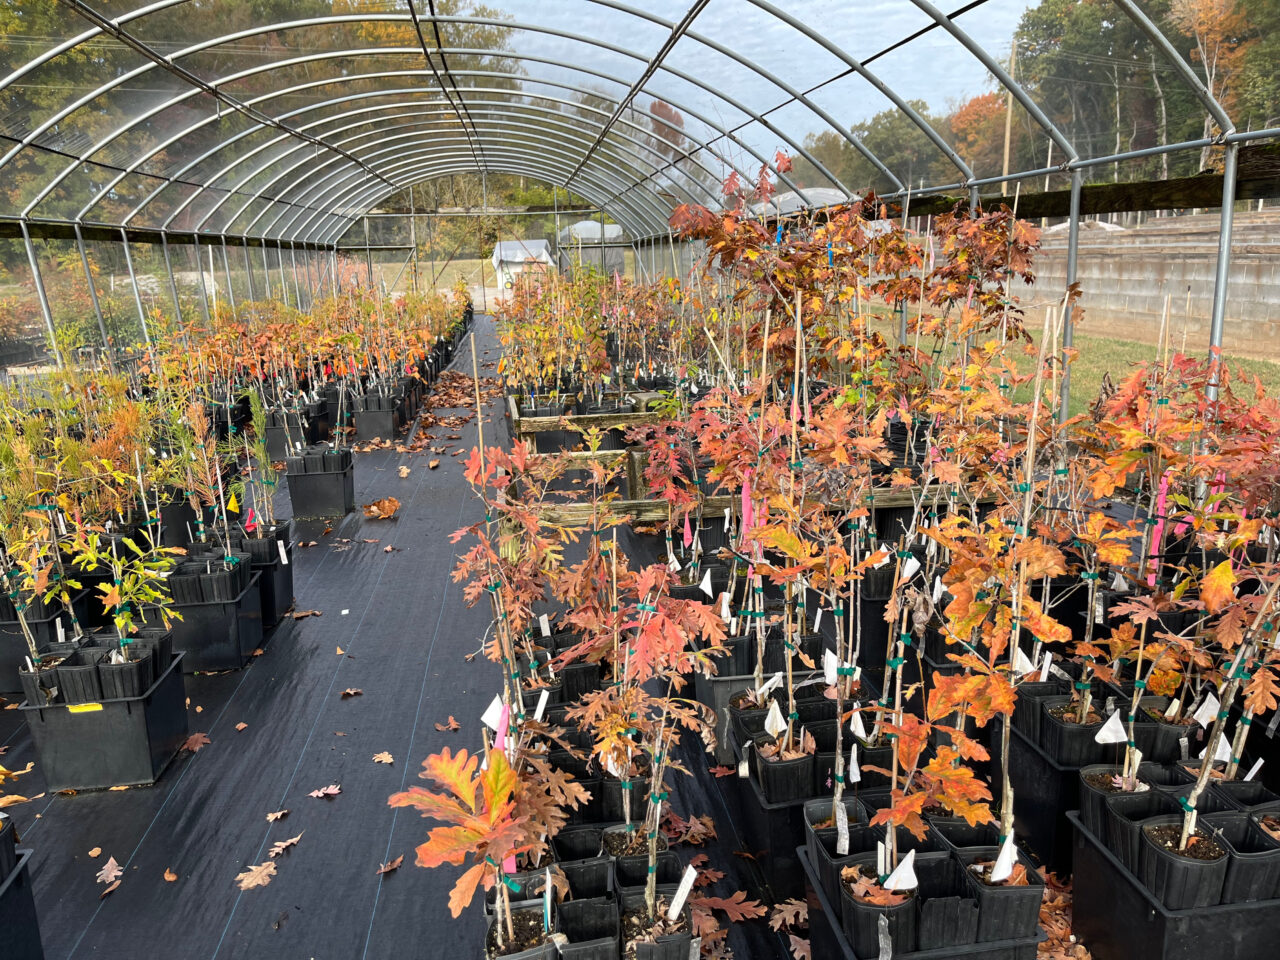 Department of Agriculture’s East Tennessee Seedling Nursery in Delano, Tenn., conducts research on tree health and grows seedlings for public and private reforestation, conservation and erosion control. Mitzy Sosa / American Forests